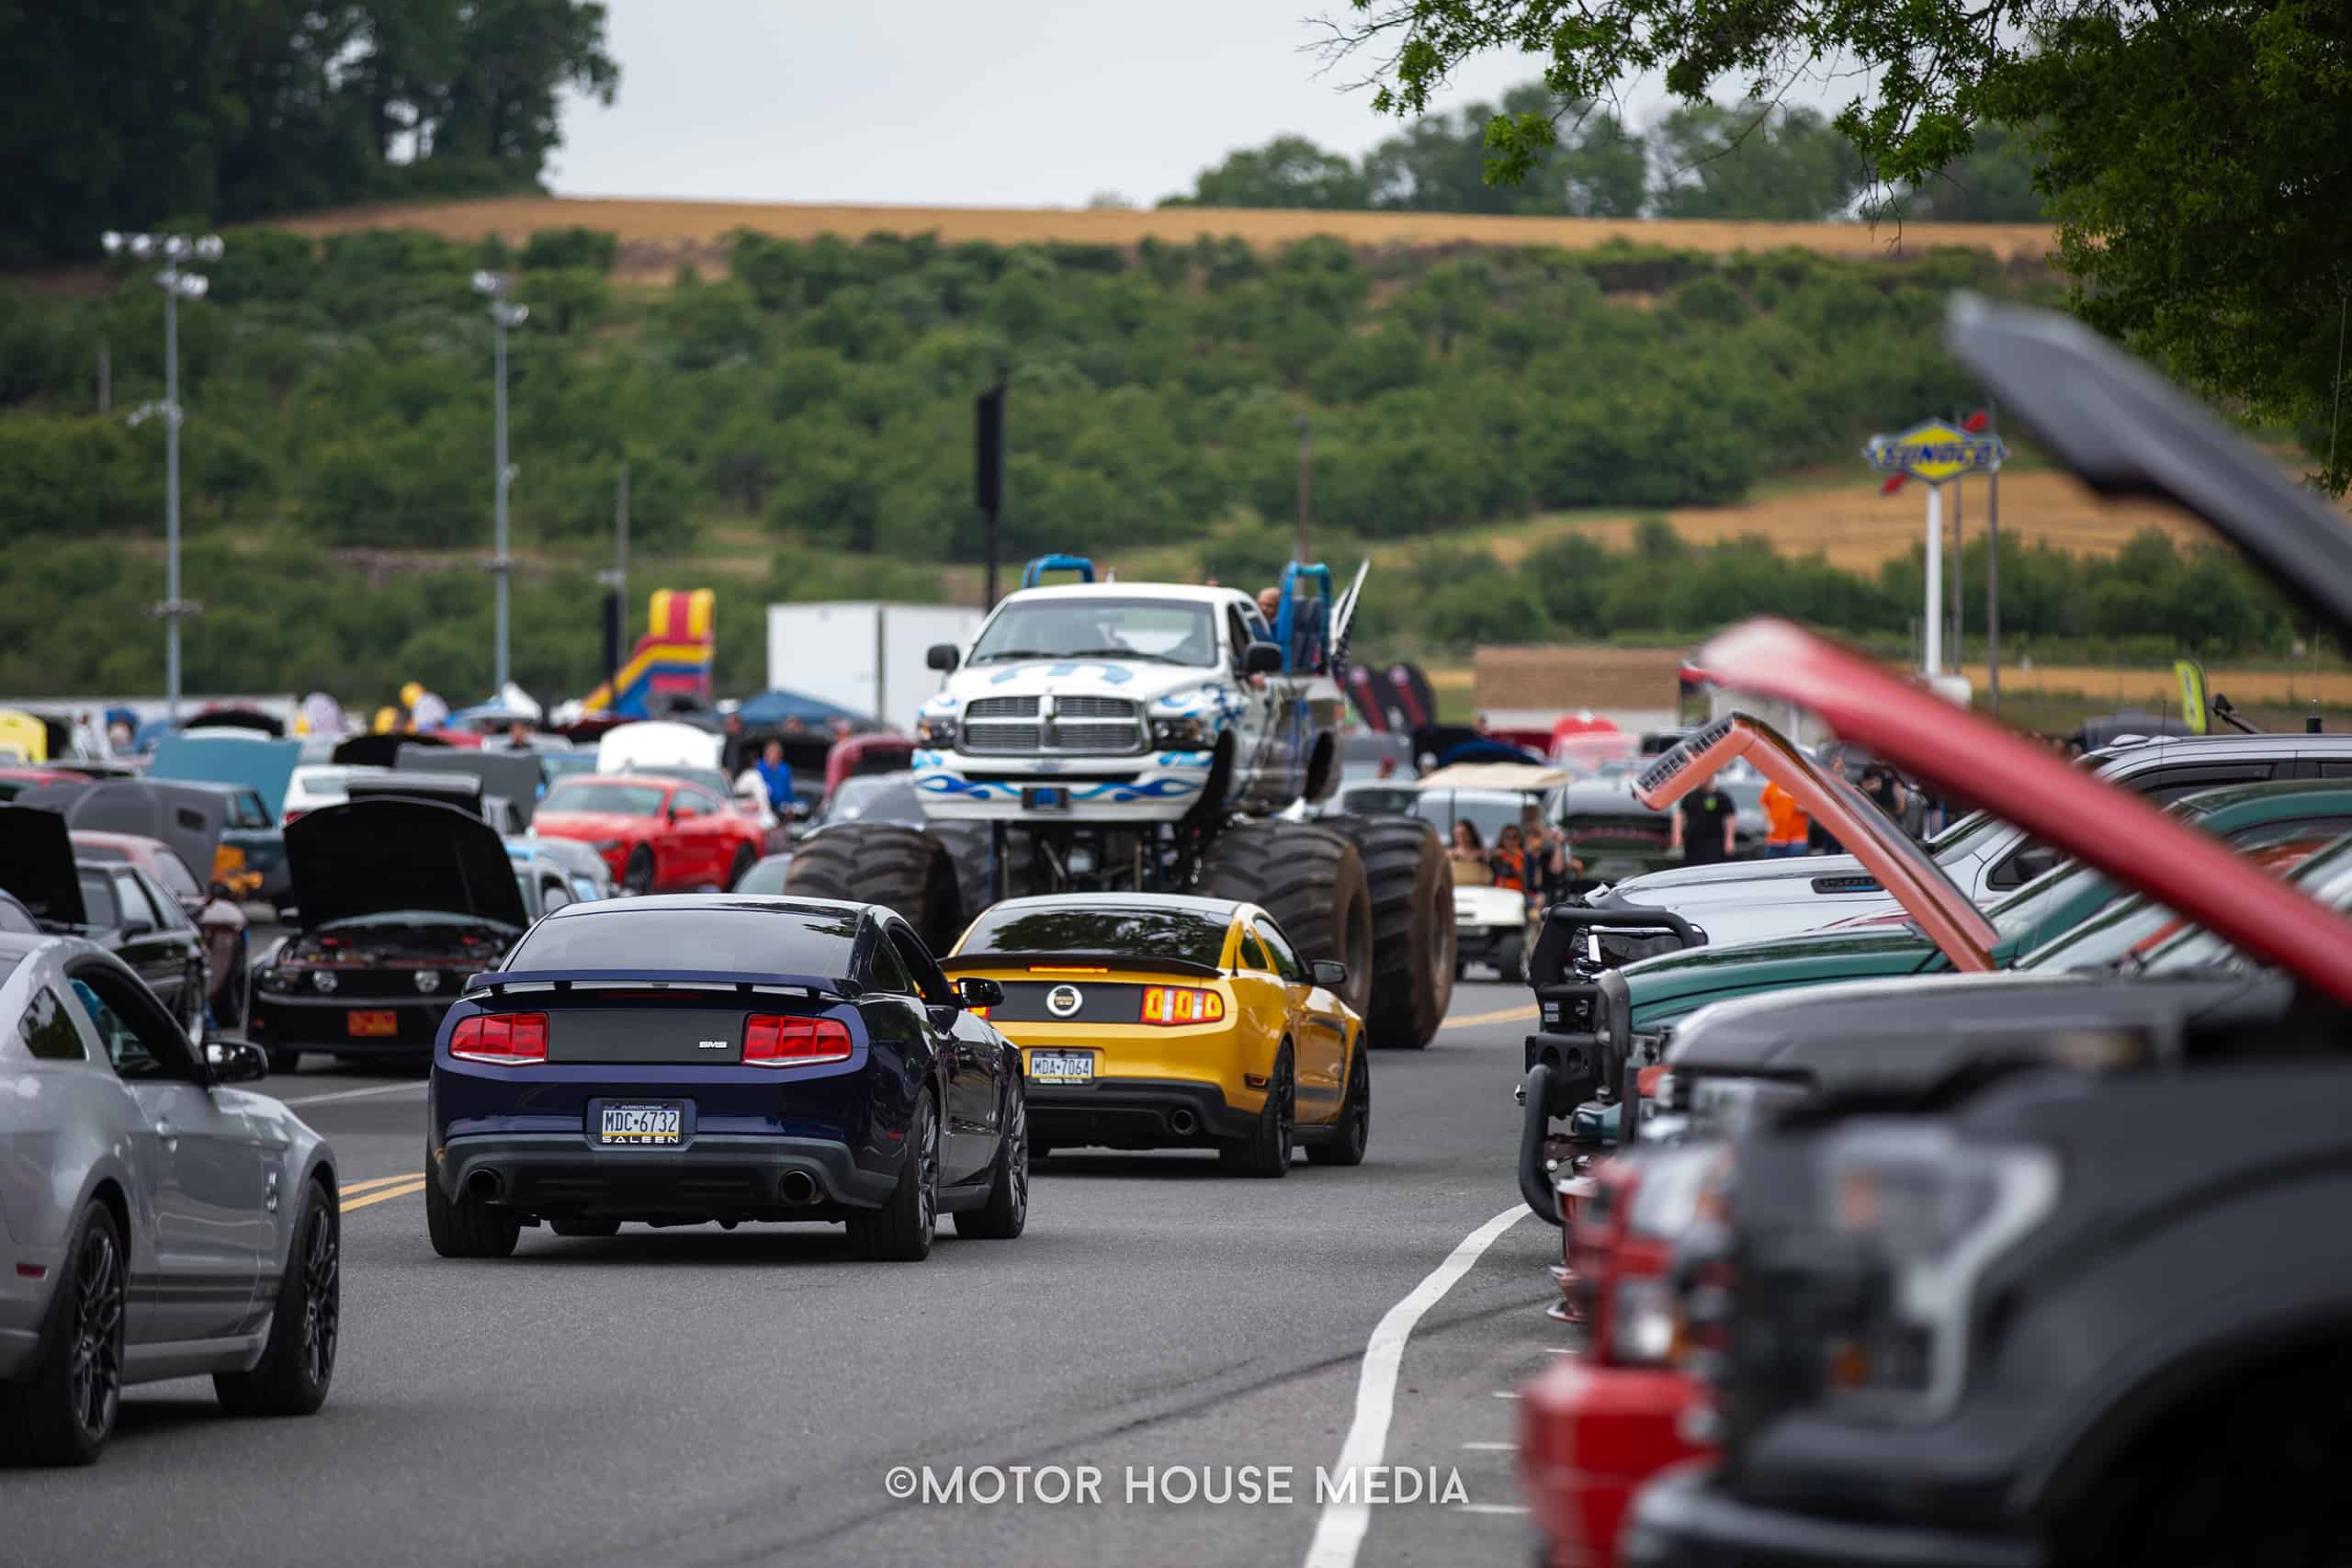 Turn 5 charity auto show line up of cars, trucks & Jeeps